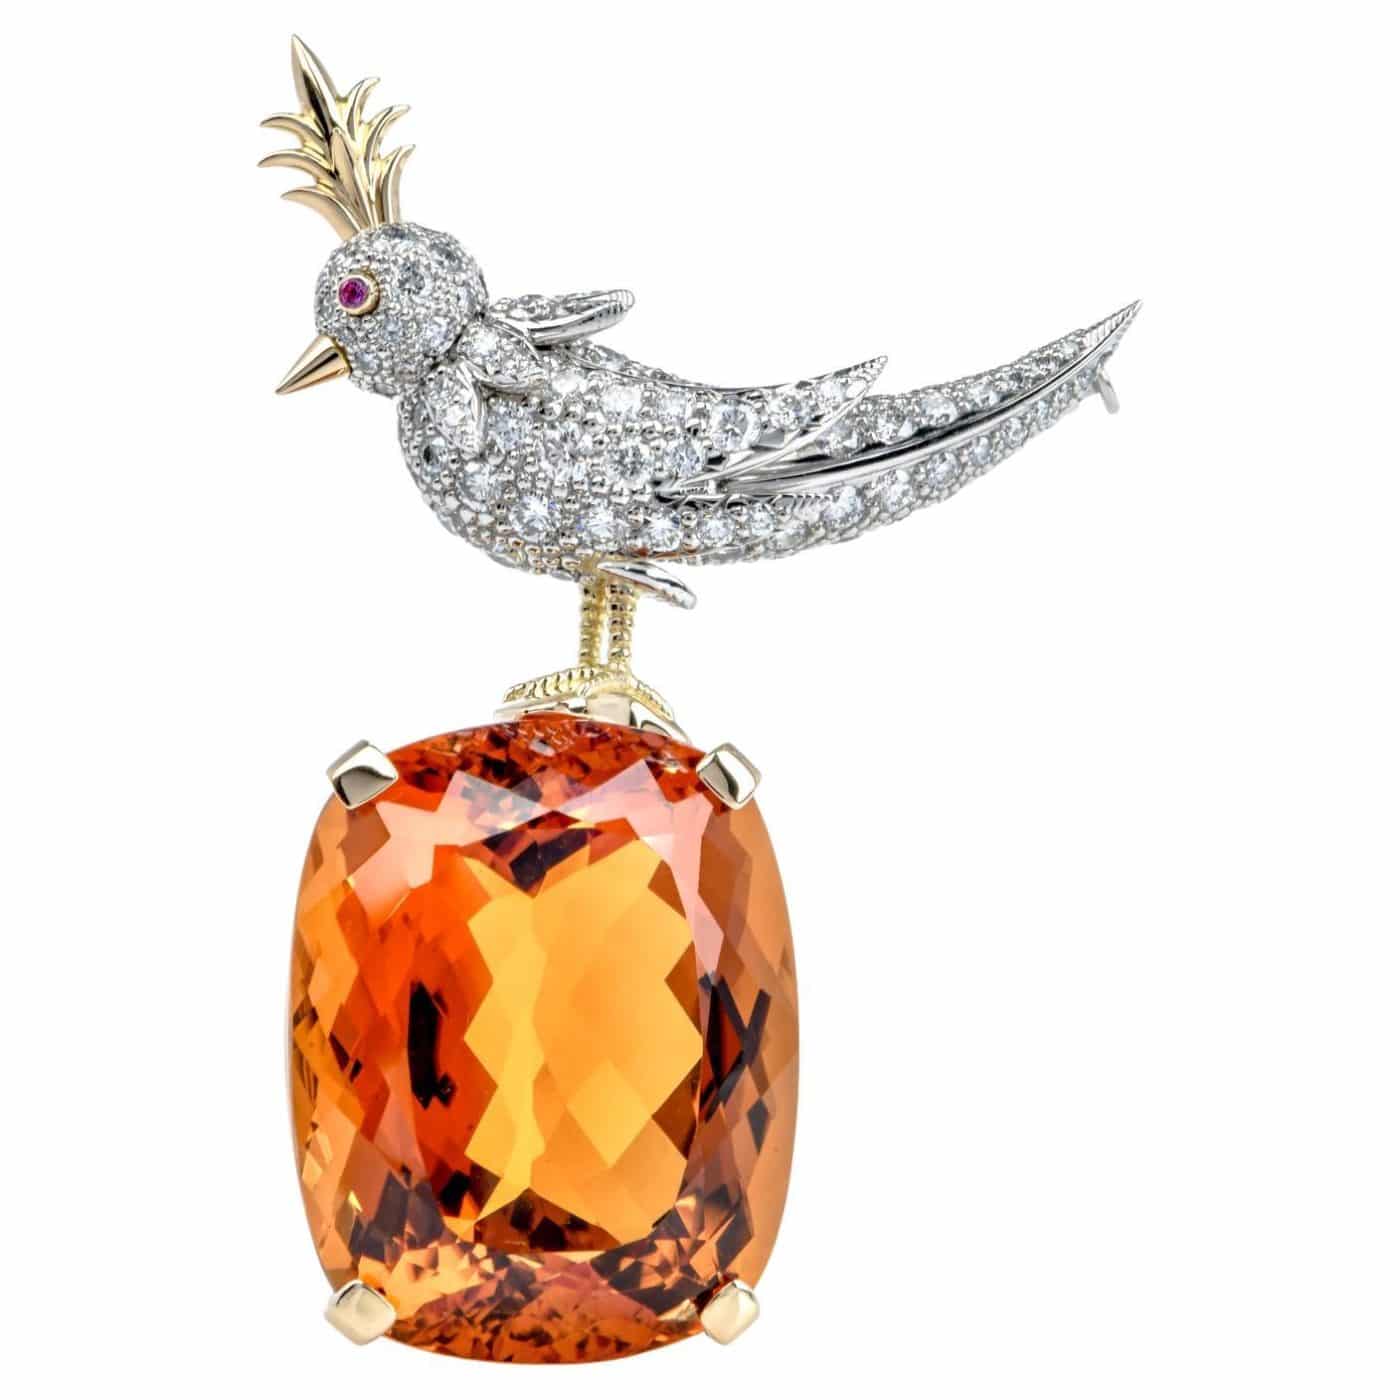 Jean Schlumberger for Tiffany & Co. Bird on a Rock Citrine and Diamond Brooch, 2000